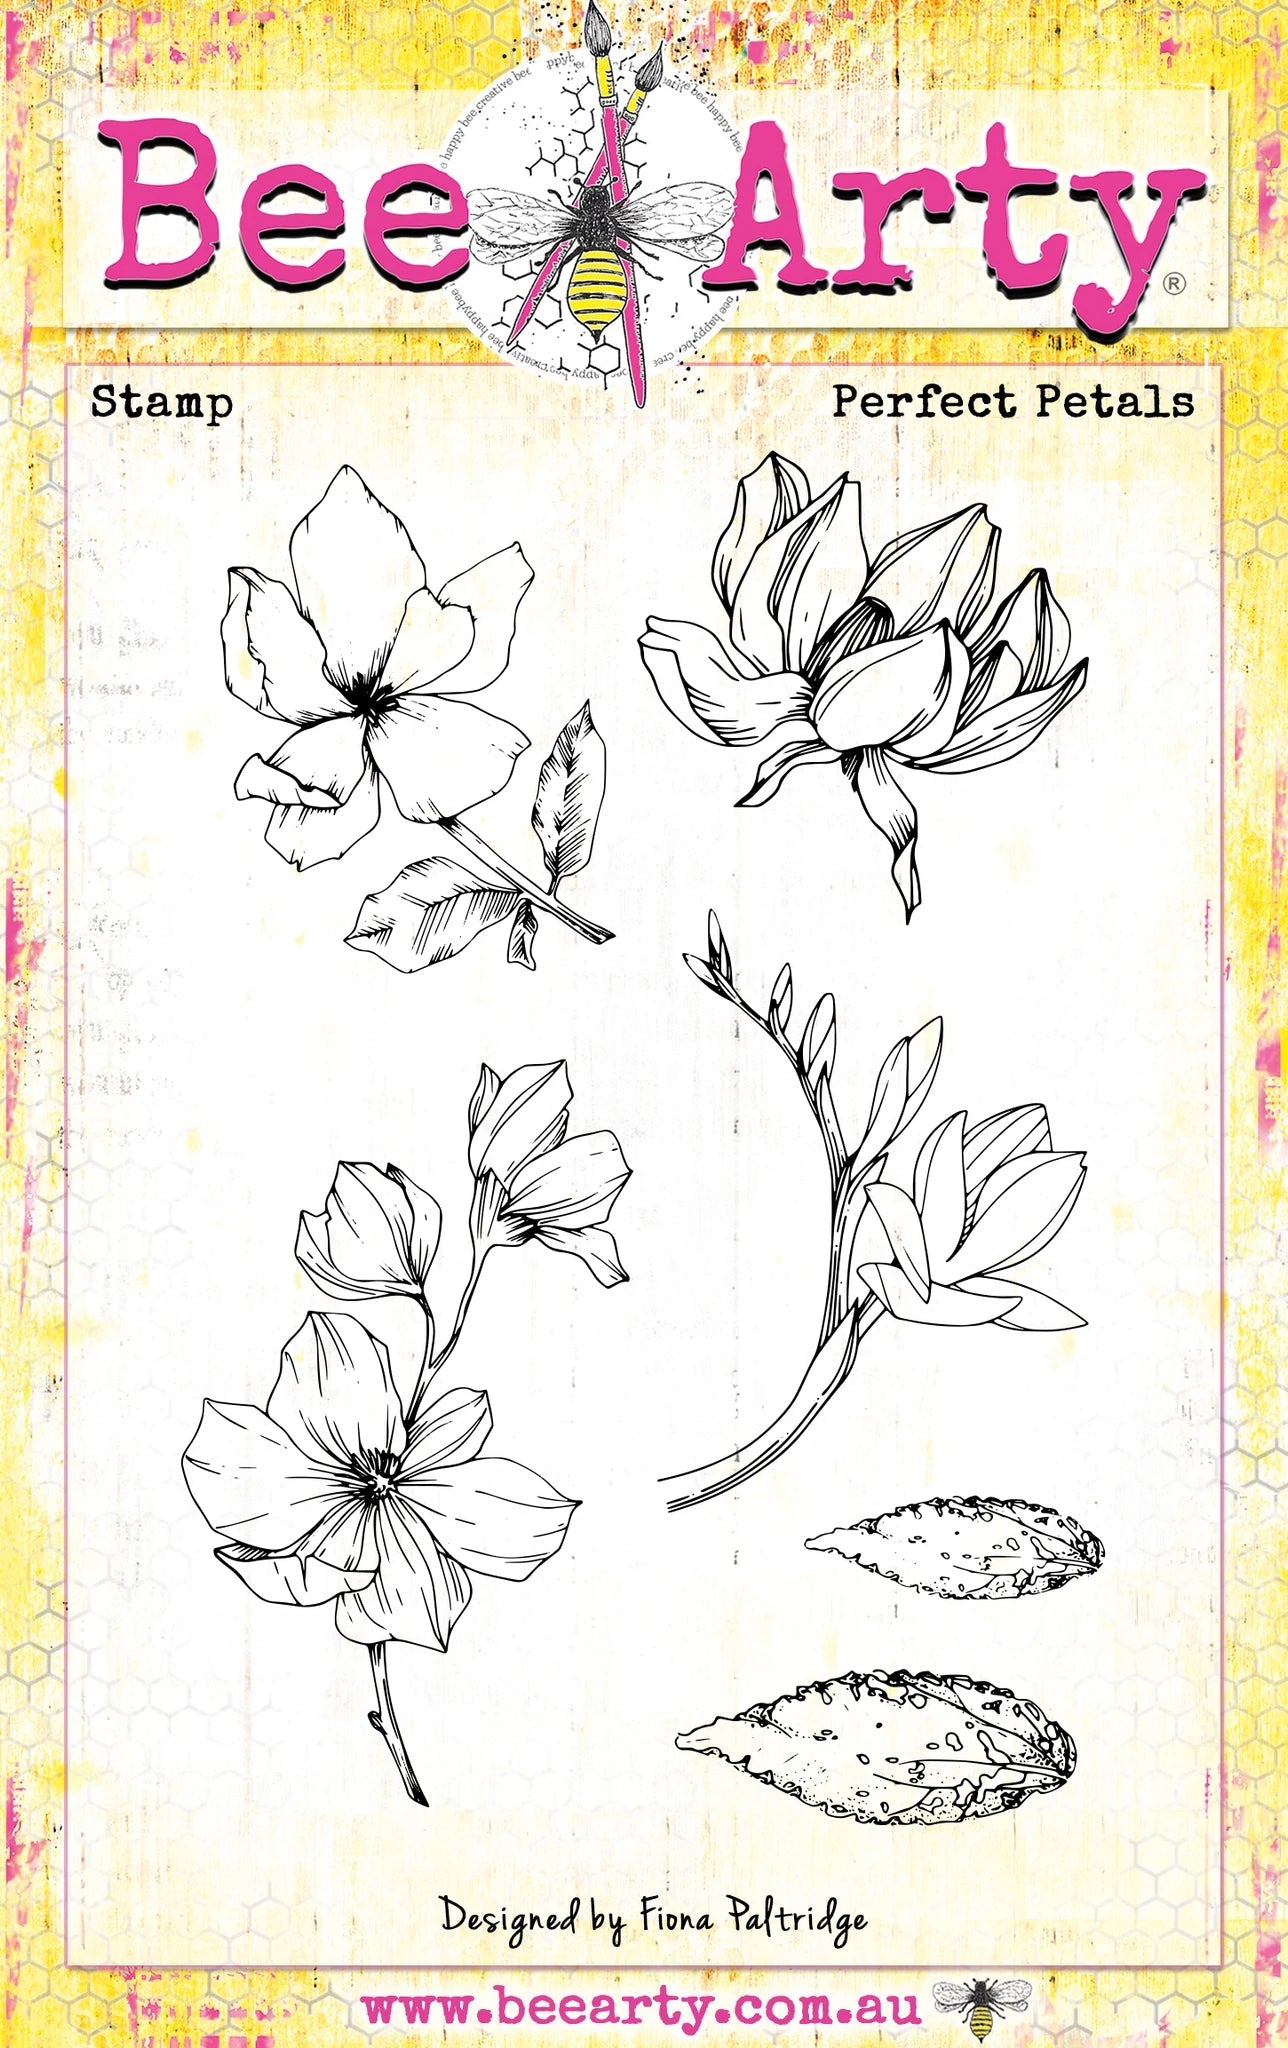 Acrylic Stamps - Perfect Petals Arts & Crafts Bee Arty